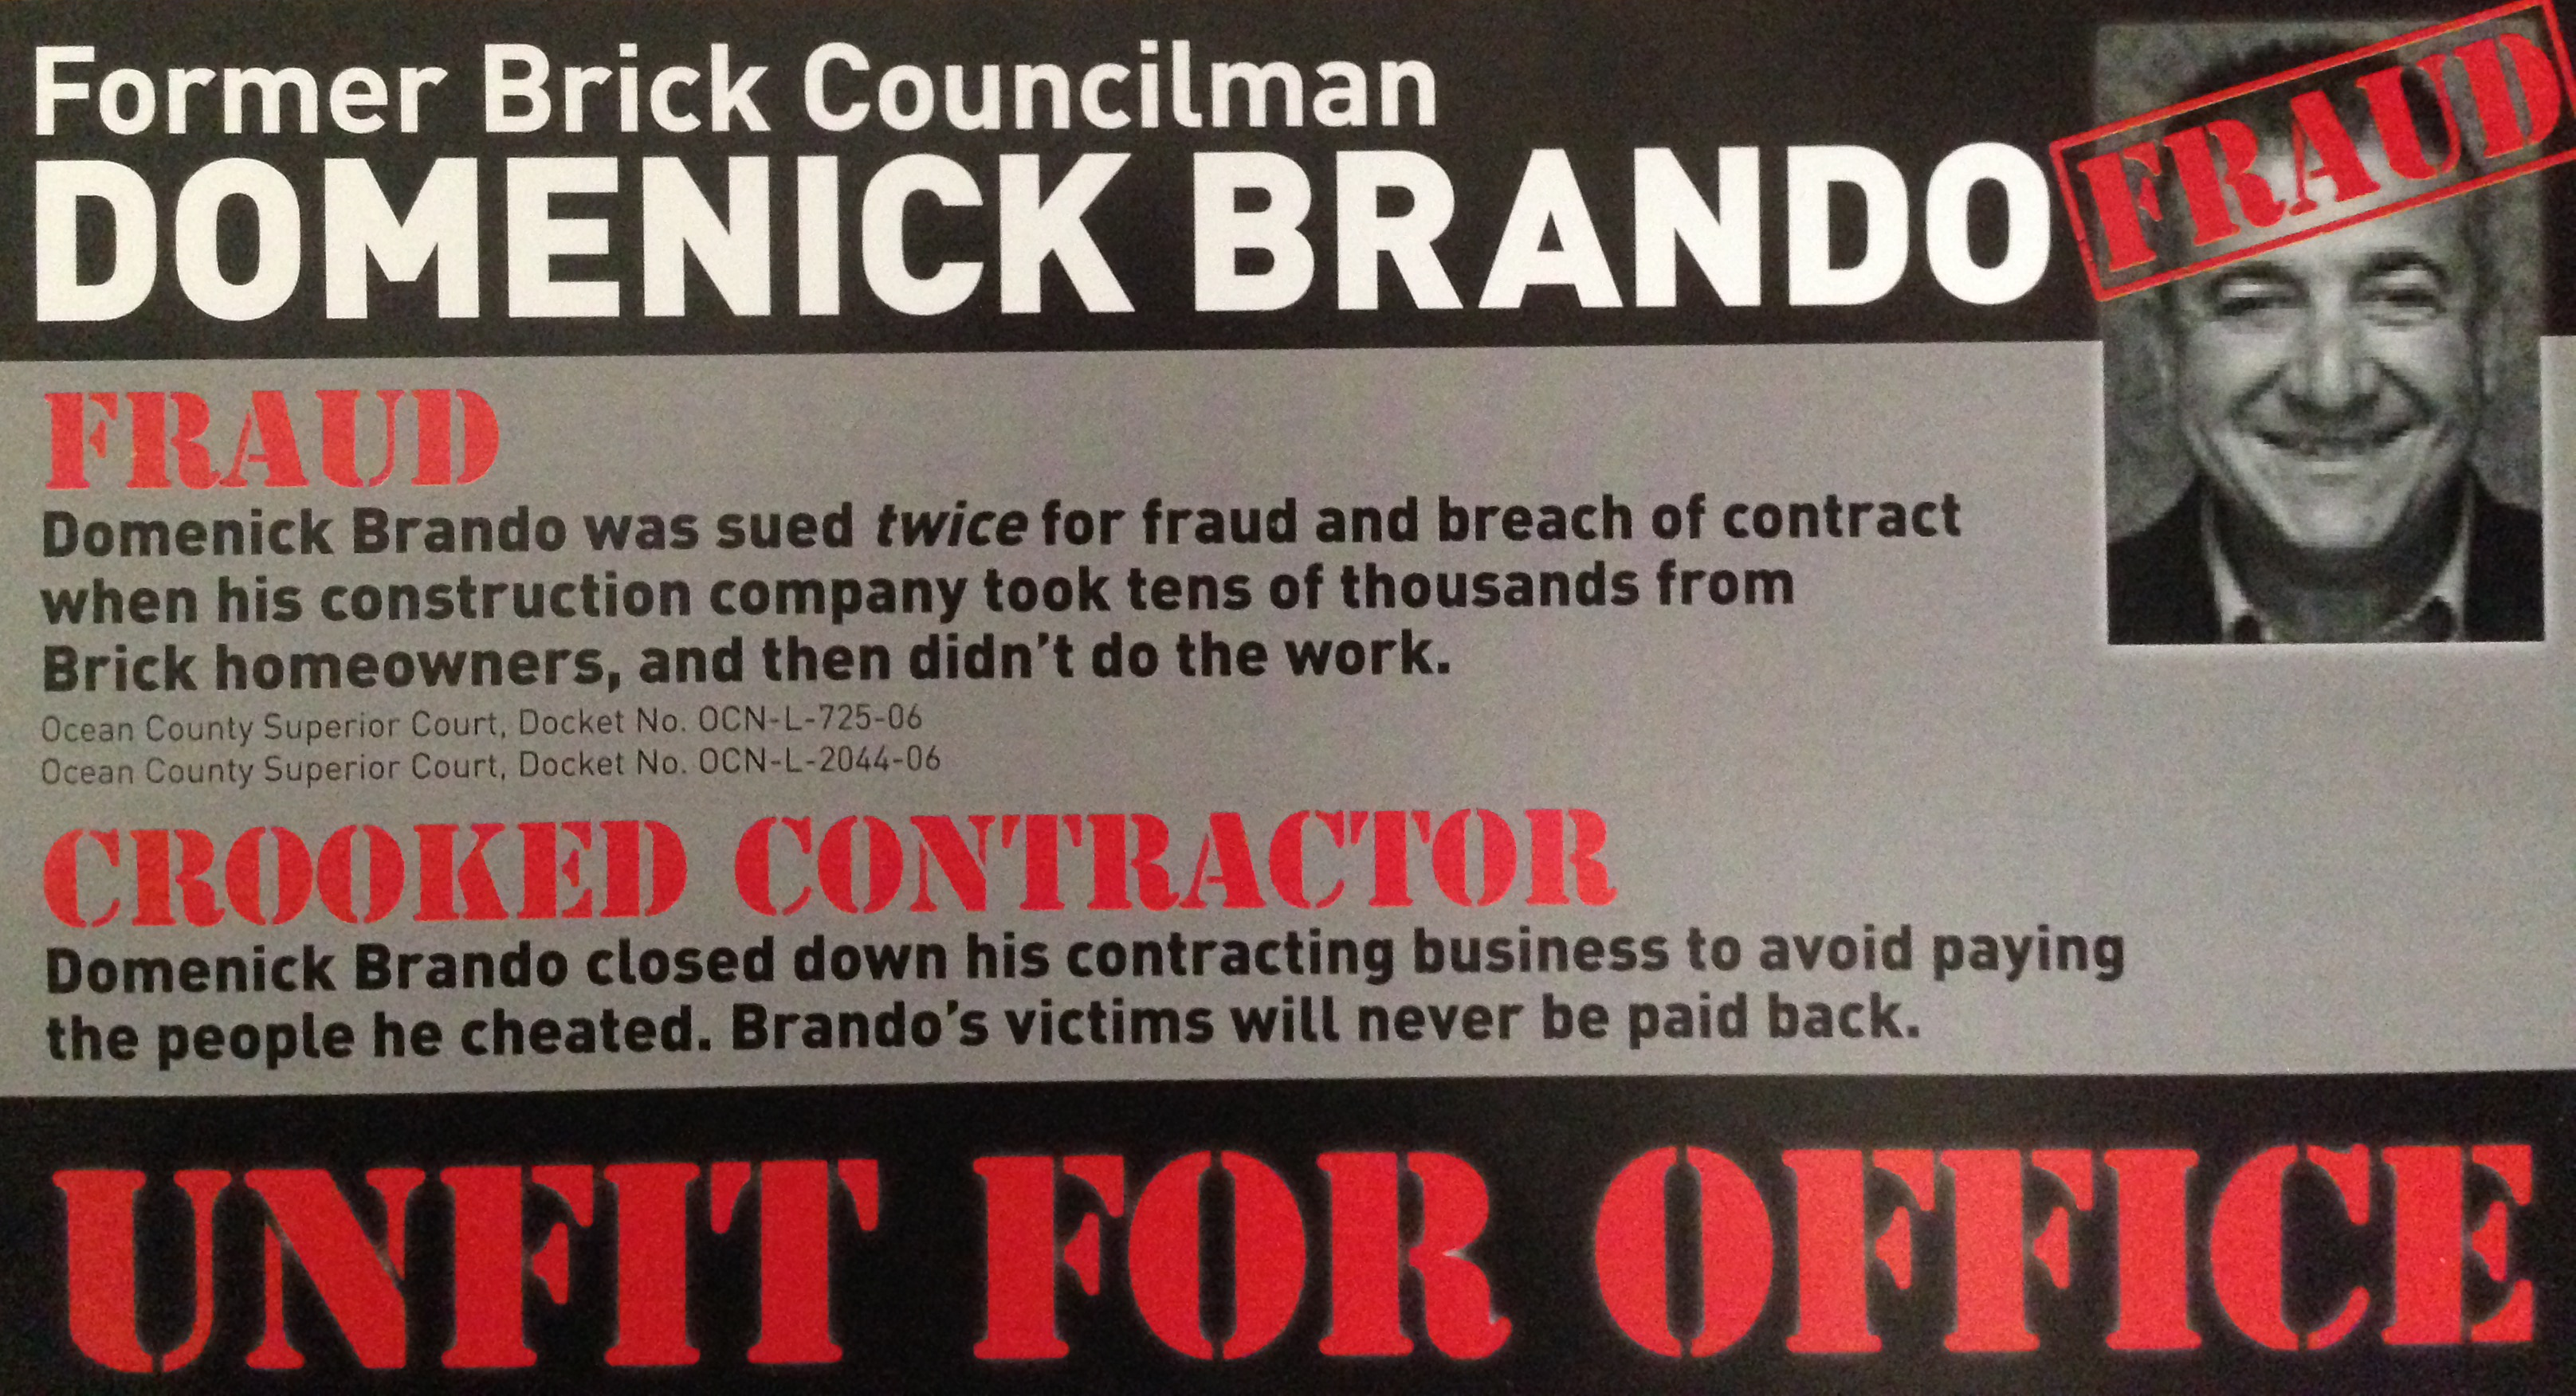 A campaign ad from Brick council candidate Andrea Zapcic, taking aim at her opponent, Domenick Brando.